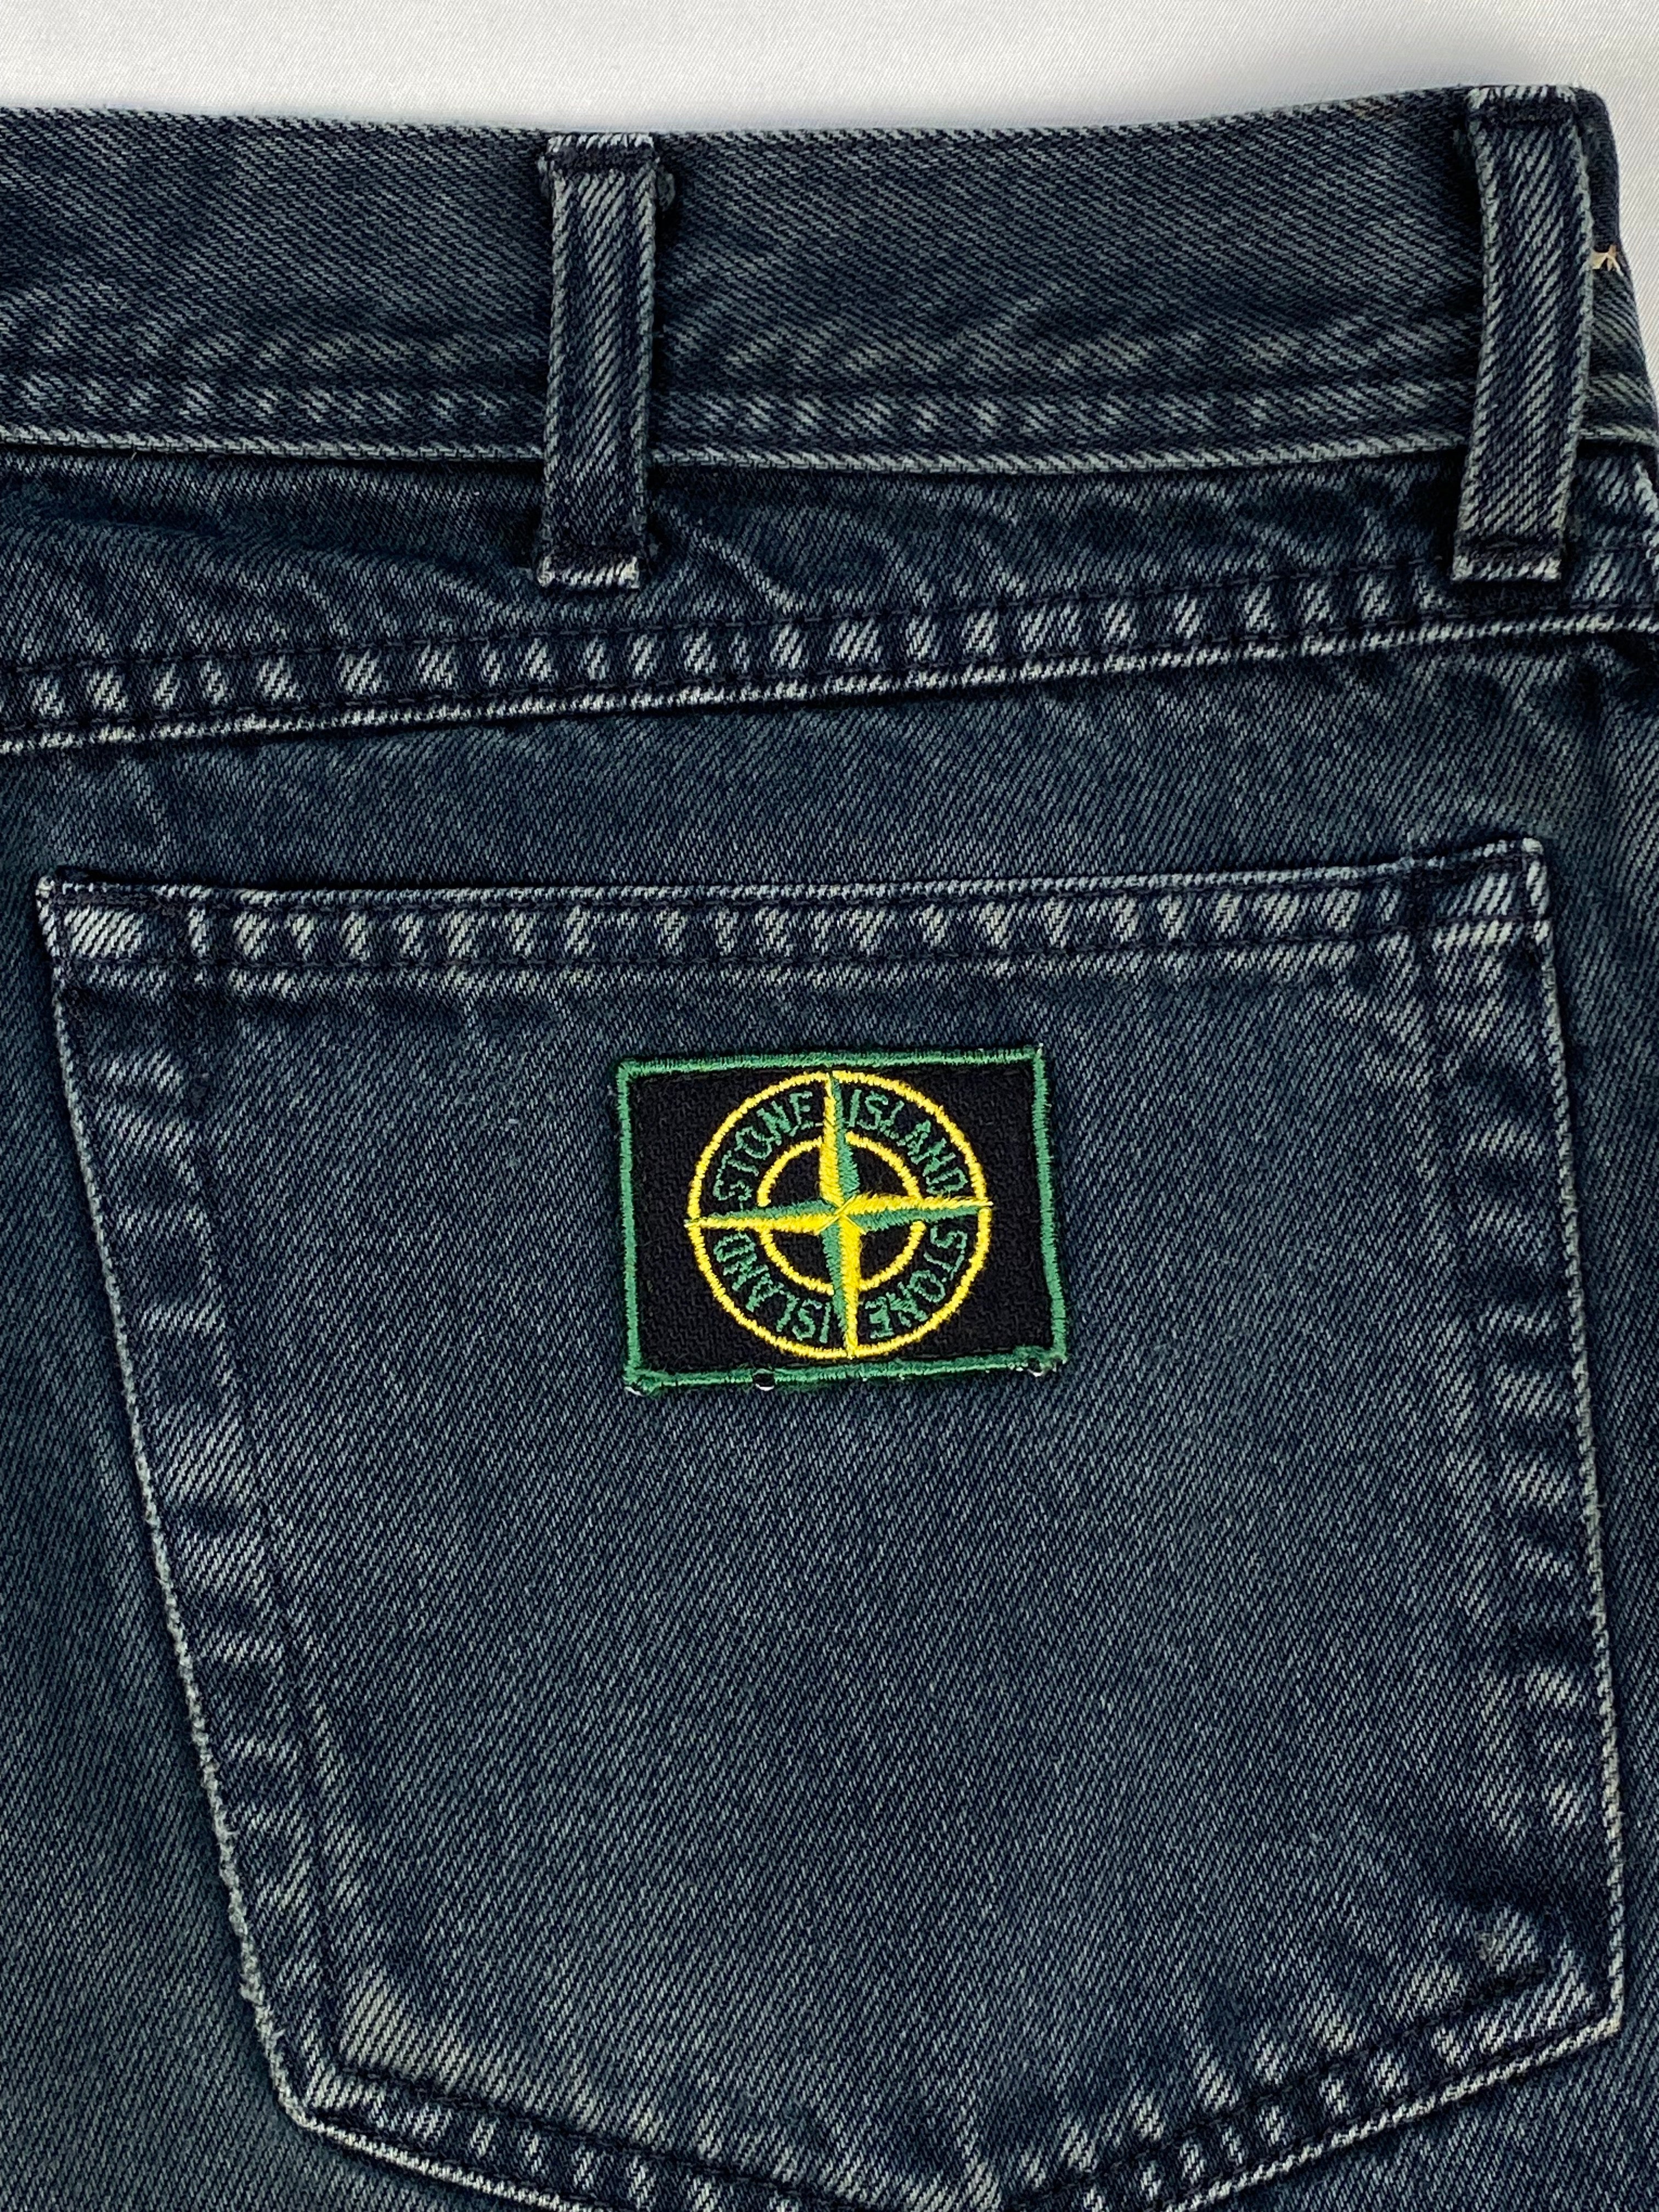 ARCHIVE STONE ISLAND S/S 2002 GREEN PATCH WASHED DENIM. (50 / M ...